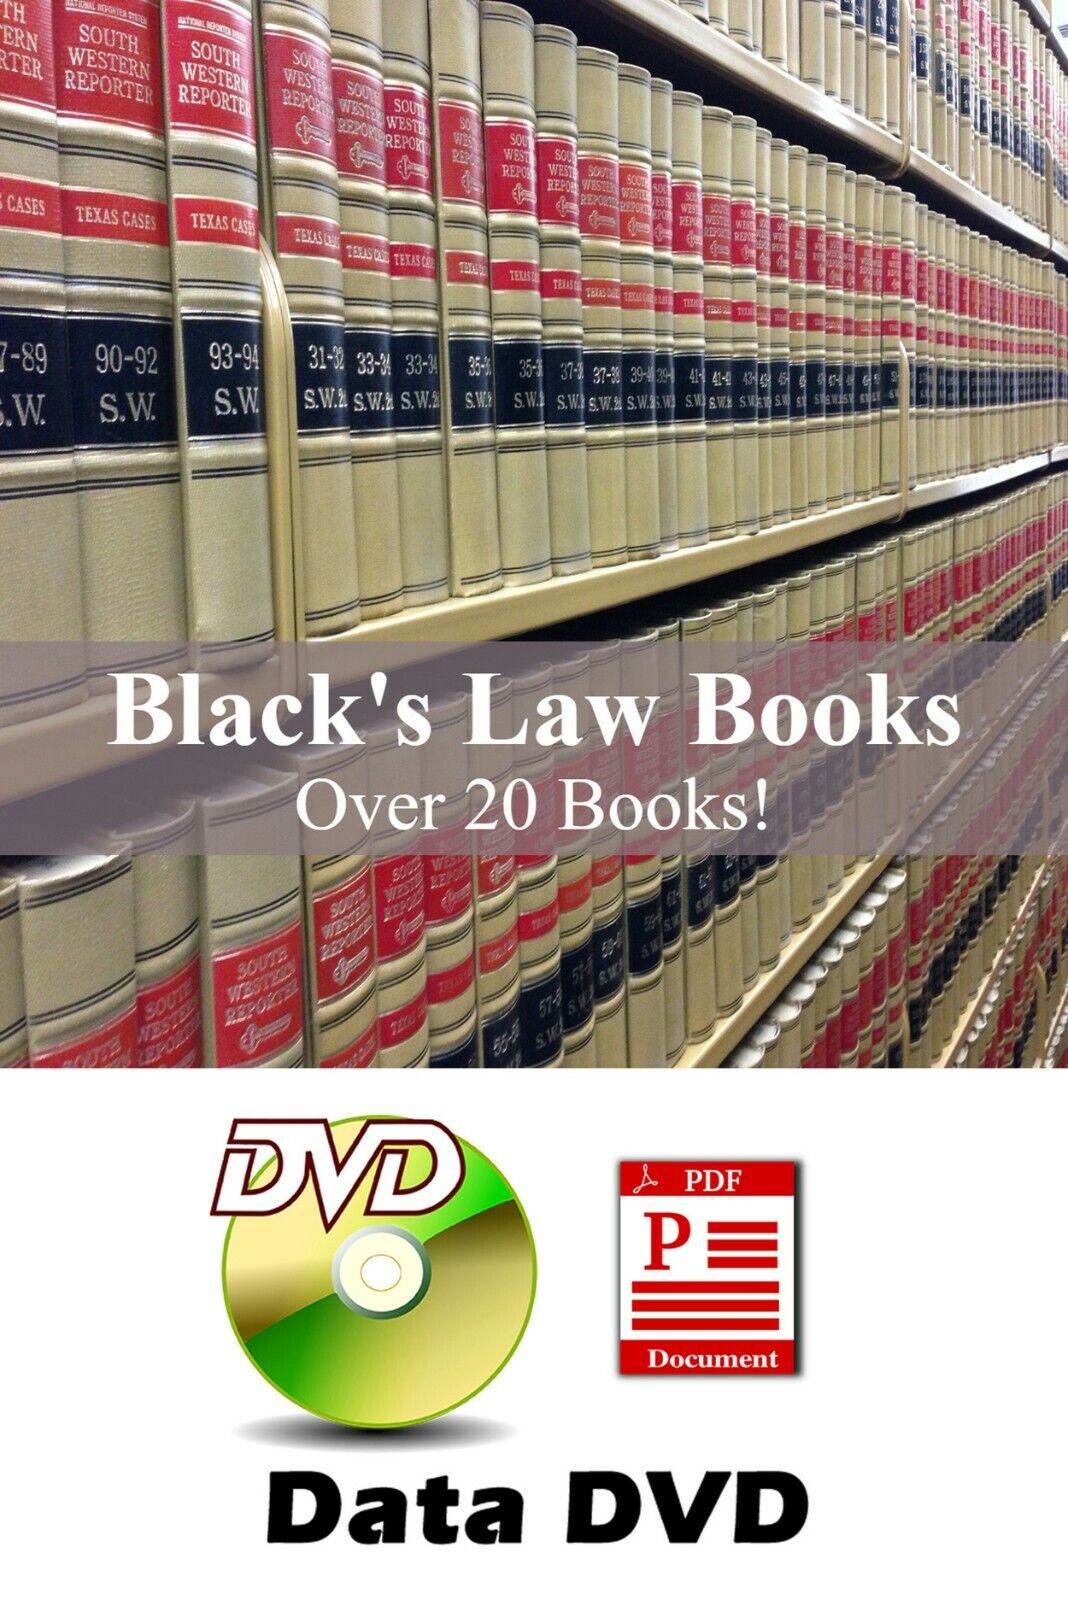 HUGE Black's Law Books - 19 books + Black’s Law Dictionary 1st & 2nd Ed on DVD 